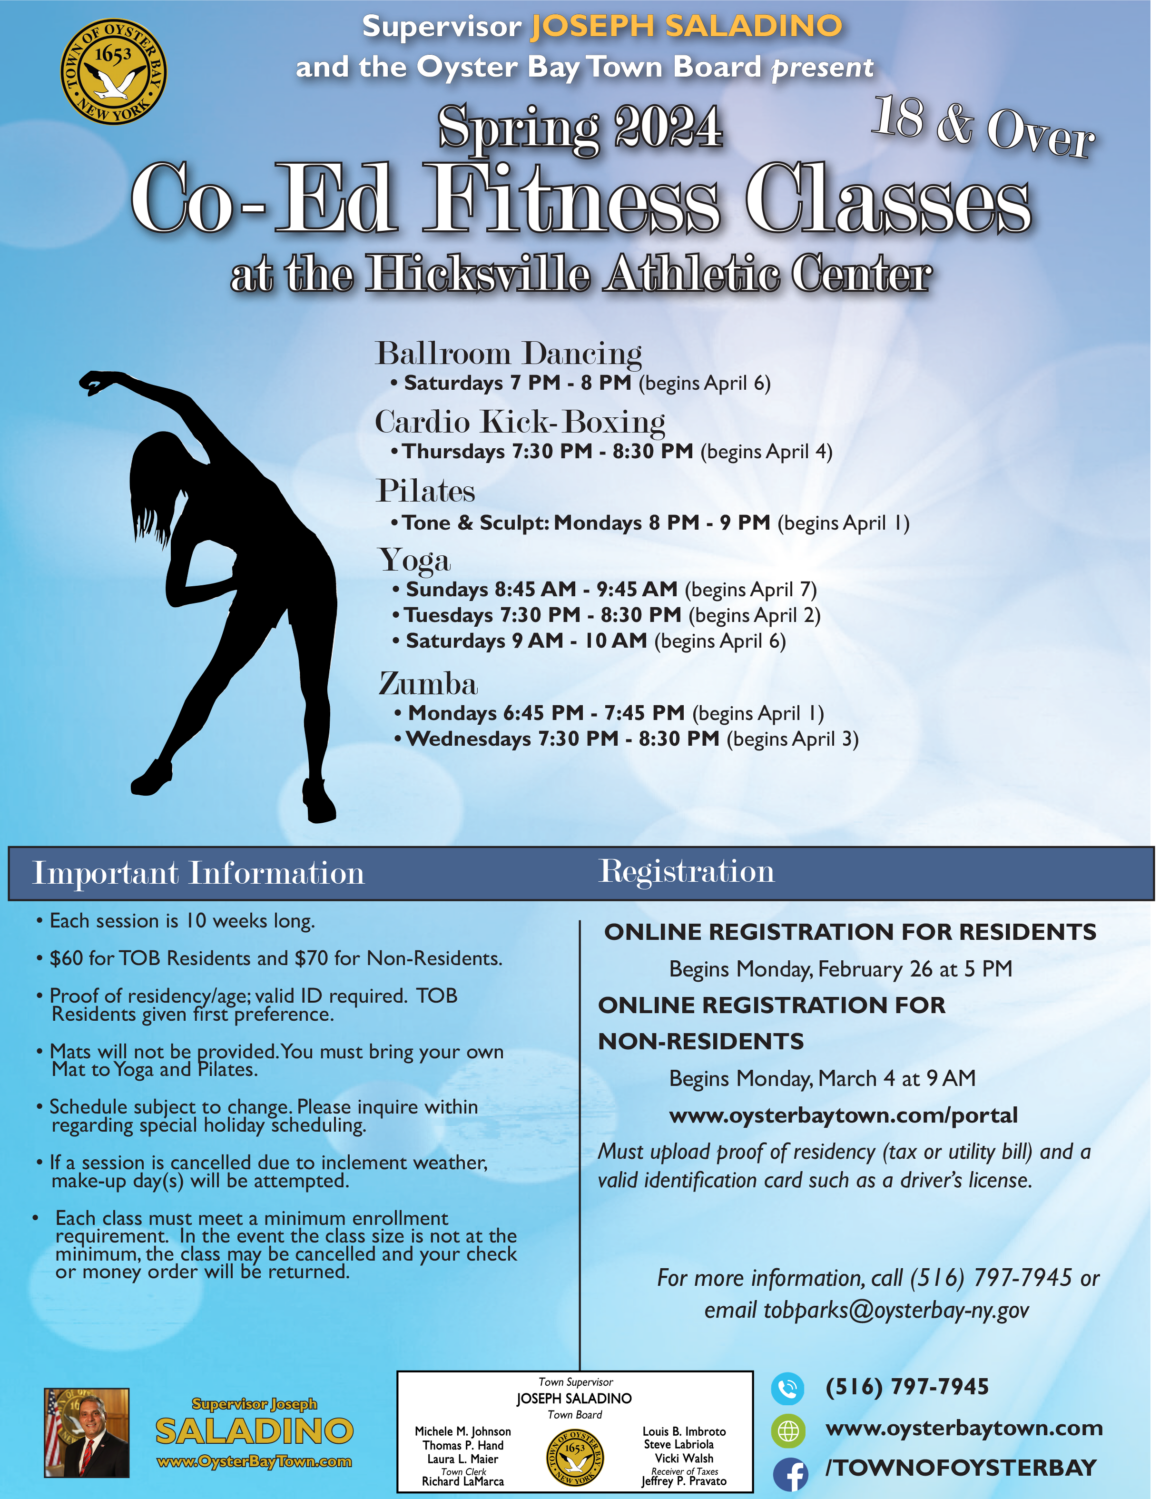 Registration Underway for Town’s Spring Co-Ed Fitness Classes